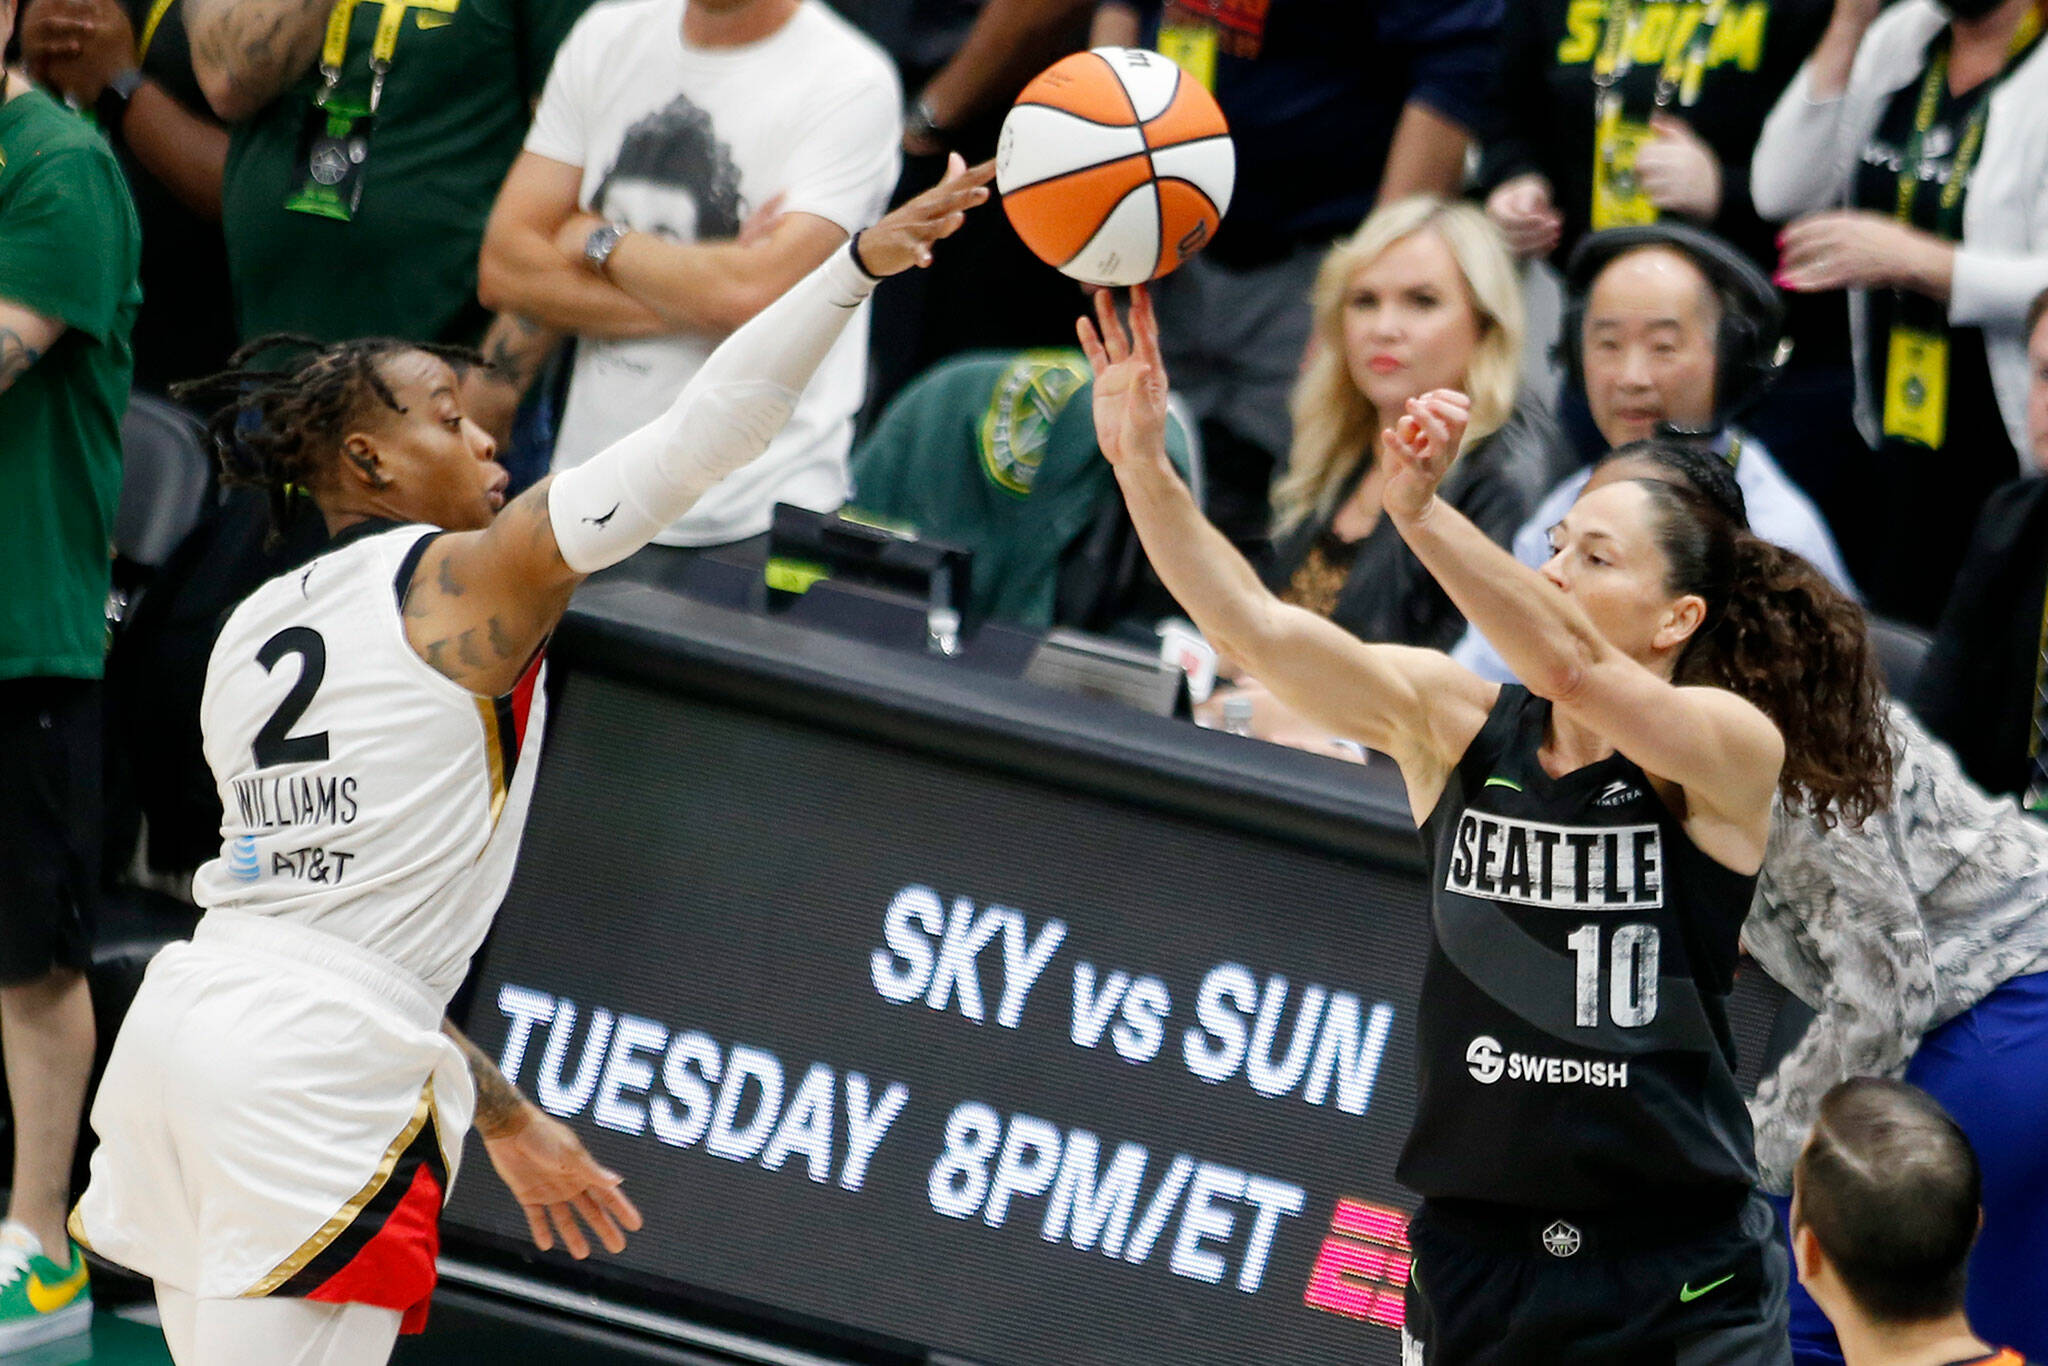 The Seattle Storm’s Sue Bird hits a go-ahead three with .8 seconds left in a WNBA playoff game against the Las Vegas Aces on Sunday, Sep. 4, 2022, at Climate Pledge Arena in Seattle, Washington. The Aces would go on to tie the game and force overtime before taking the win to go up 2-1 in the series. (Ryan Berry / The Herald)